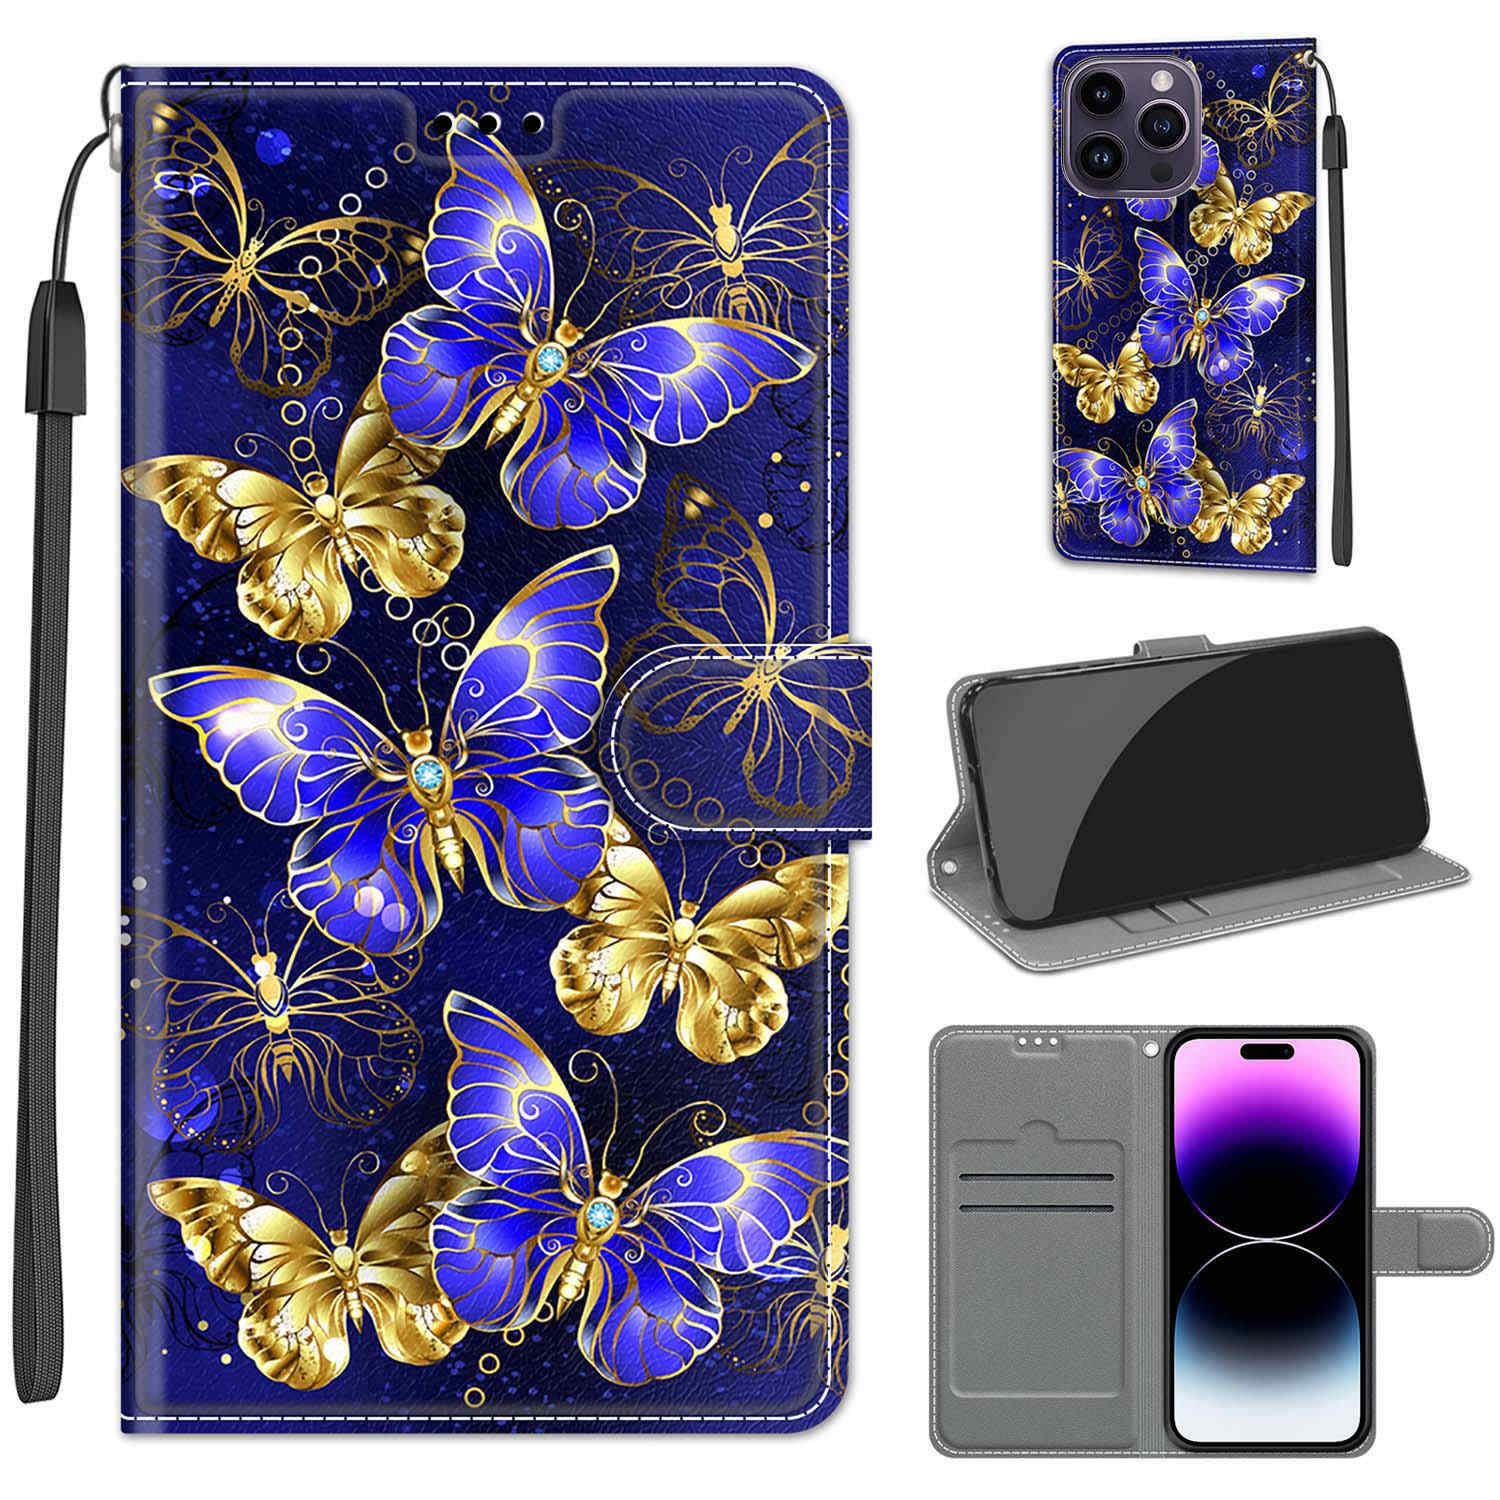 Butterfly Phone Case For iPhone Huawei Samsung Xiaomi Motorola OPPO Sony Google